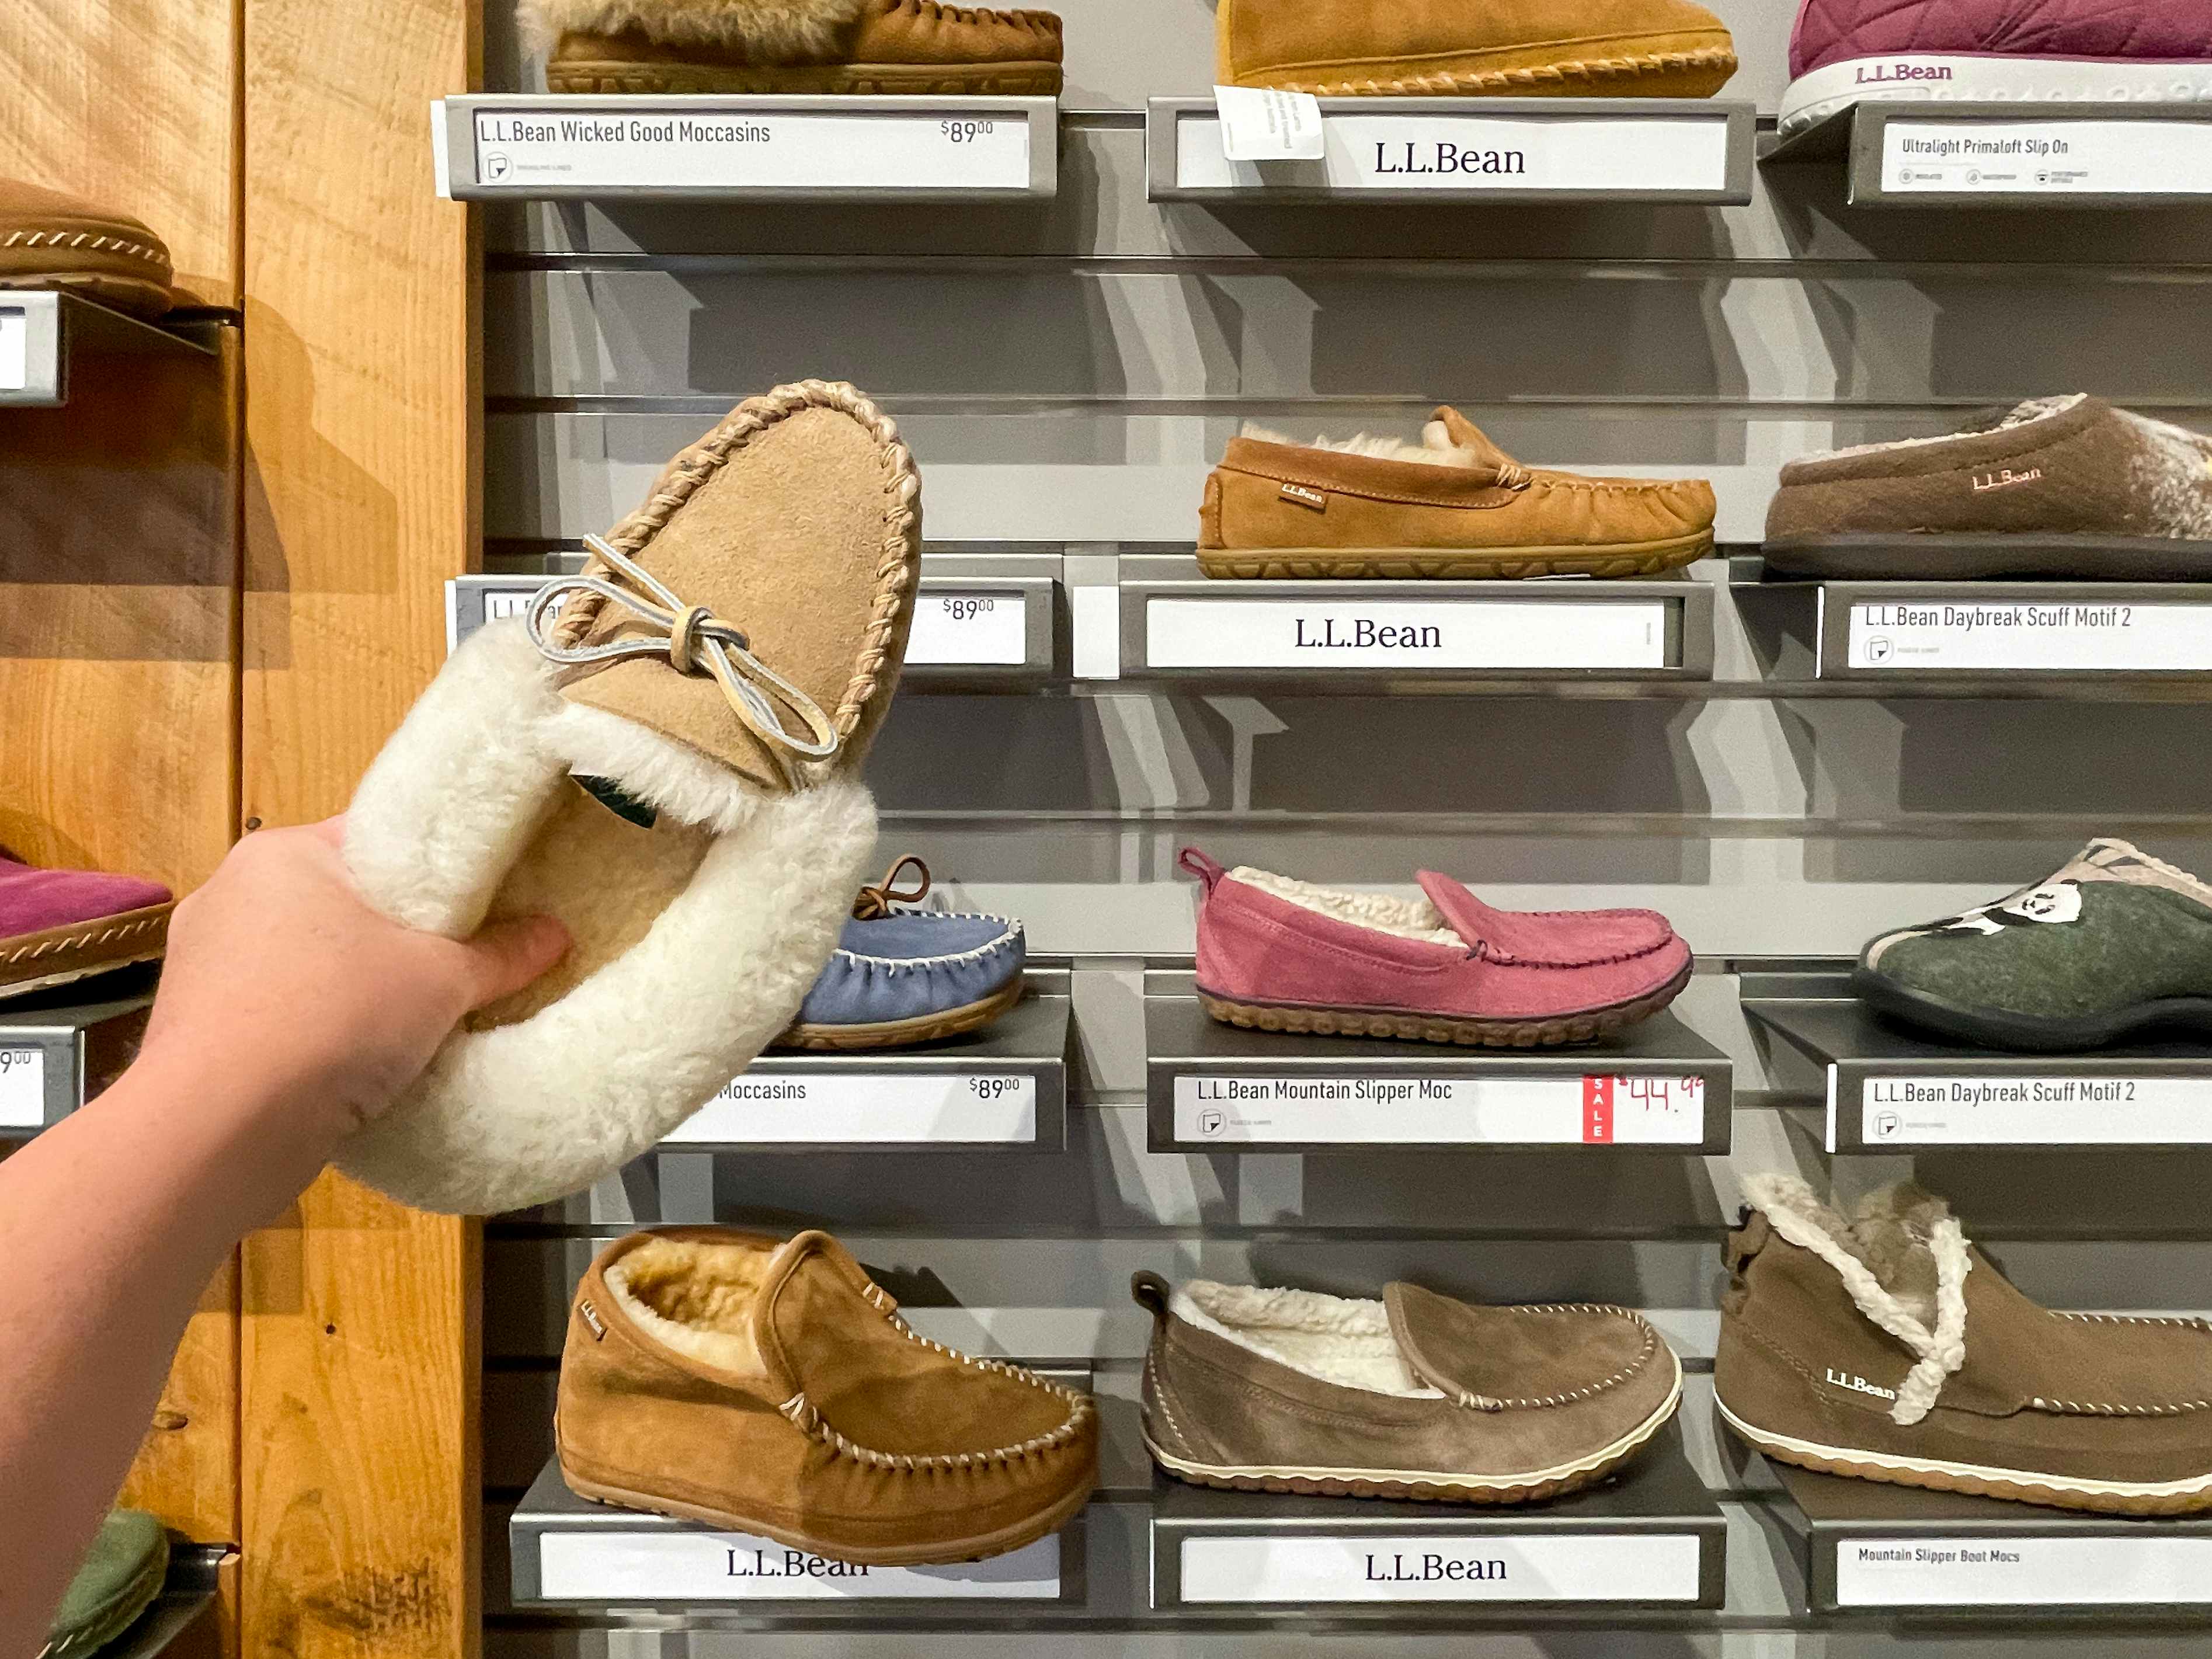 A person's hand holding up a Wicked Good Slipper in front of a wall of display moccasin slippers inside L.L.Bean